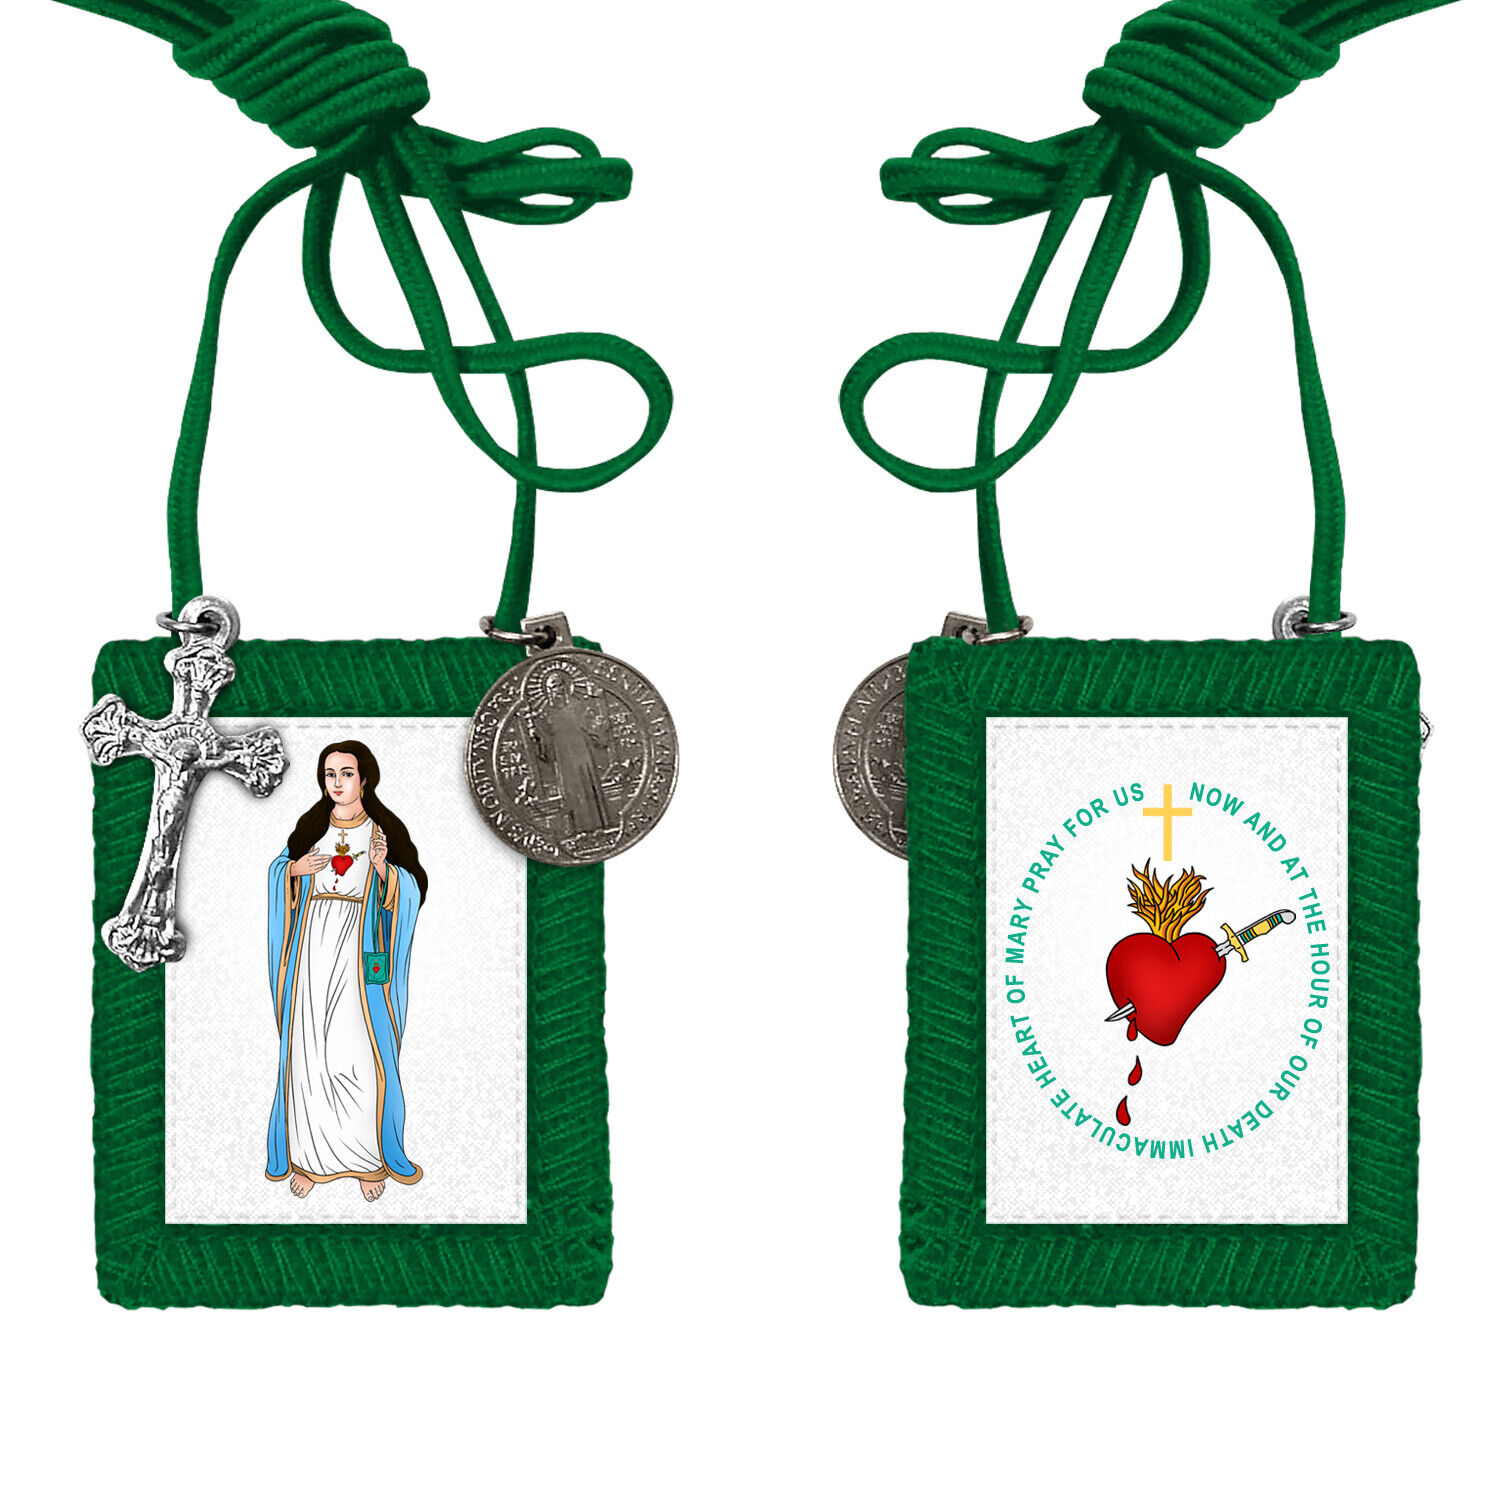 GREEN SCAPULAR IN COLOR, benedictine or saint benedict medal, and cross